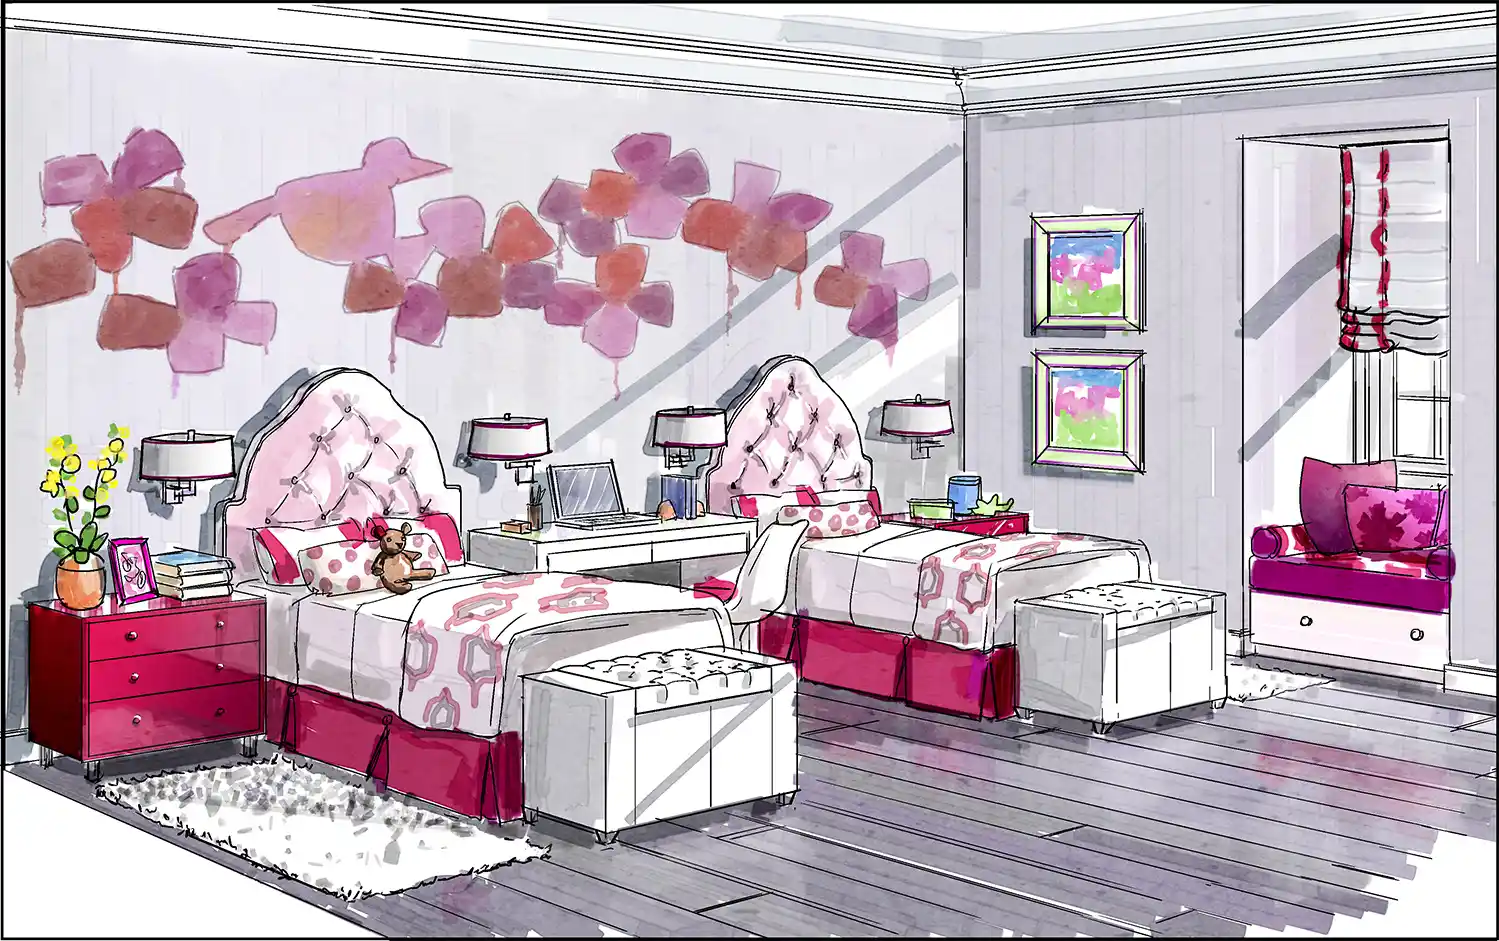 Hand-drawn interior design rendering for bedroom for two young girls.